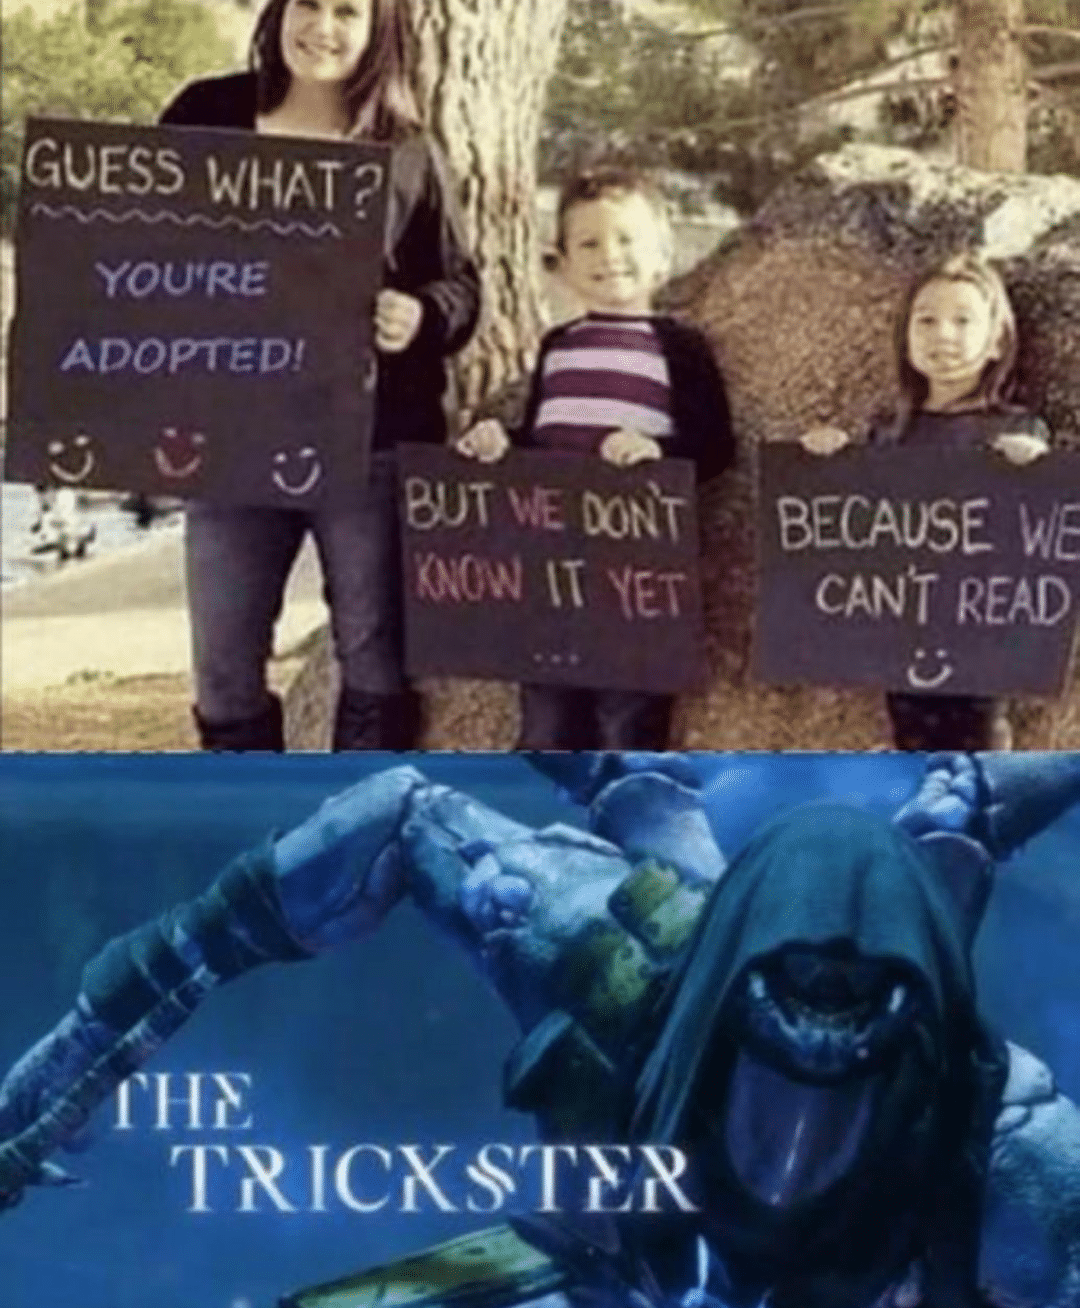 Dank Meme dank-memes cute text: GUESS WHAT ? YOU'RE ADOPTED! BUT TRICKSTER BECAUSE READ 